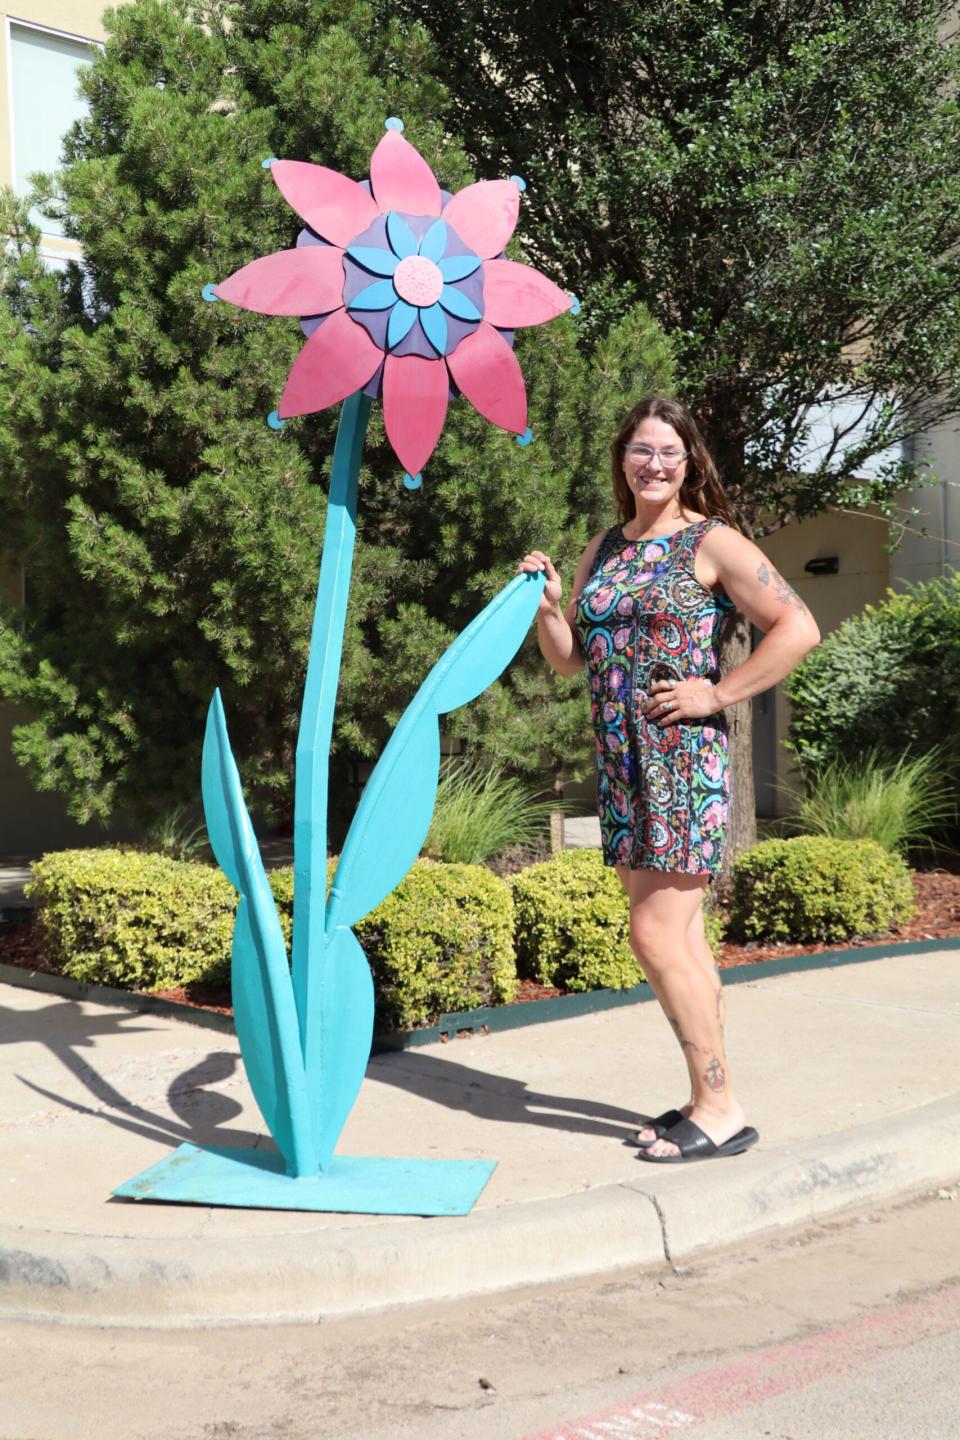 For the Lubbock Arts Festival, Glory Hartsfield has created four sculptures called “Delightful Fantasy Flowers.” Each flower measures over 13 feet tall and has bright, colorful petals and multiple heads and stems.